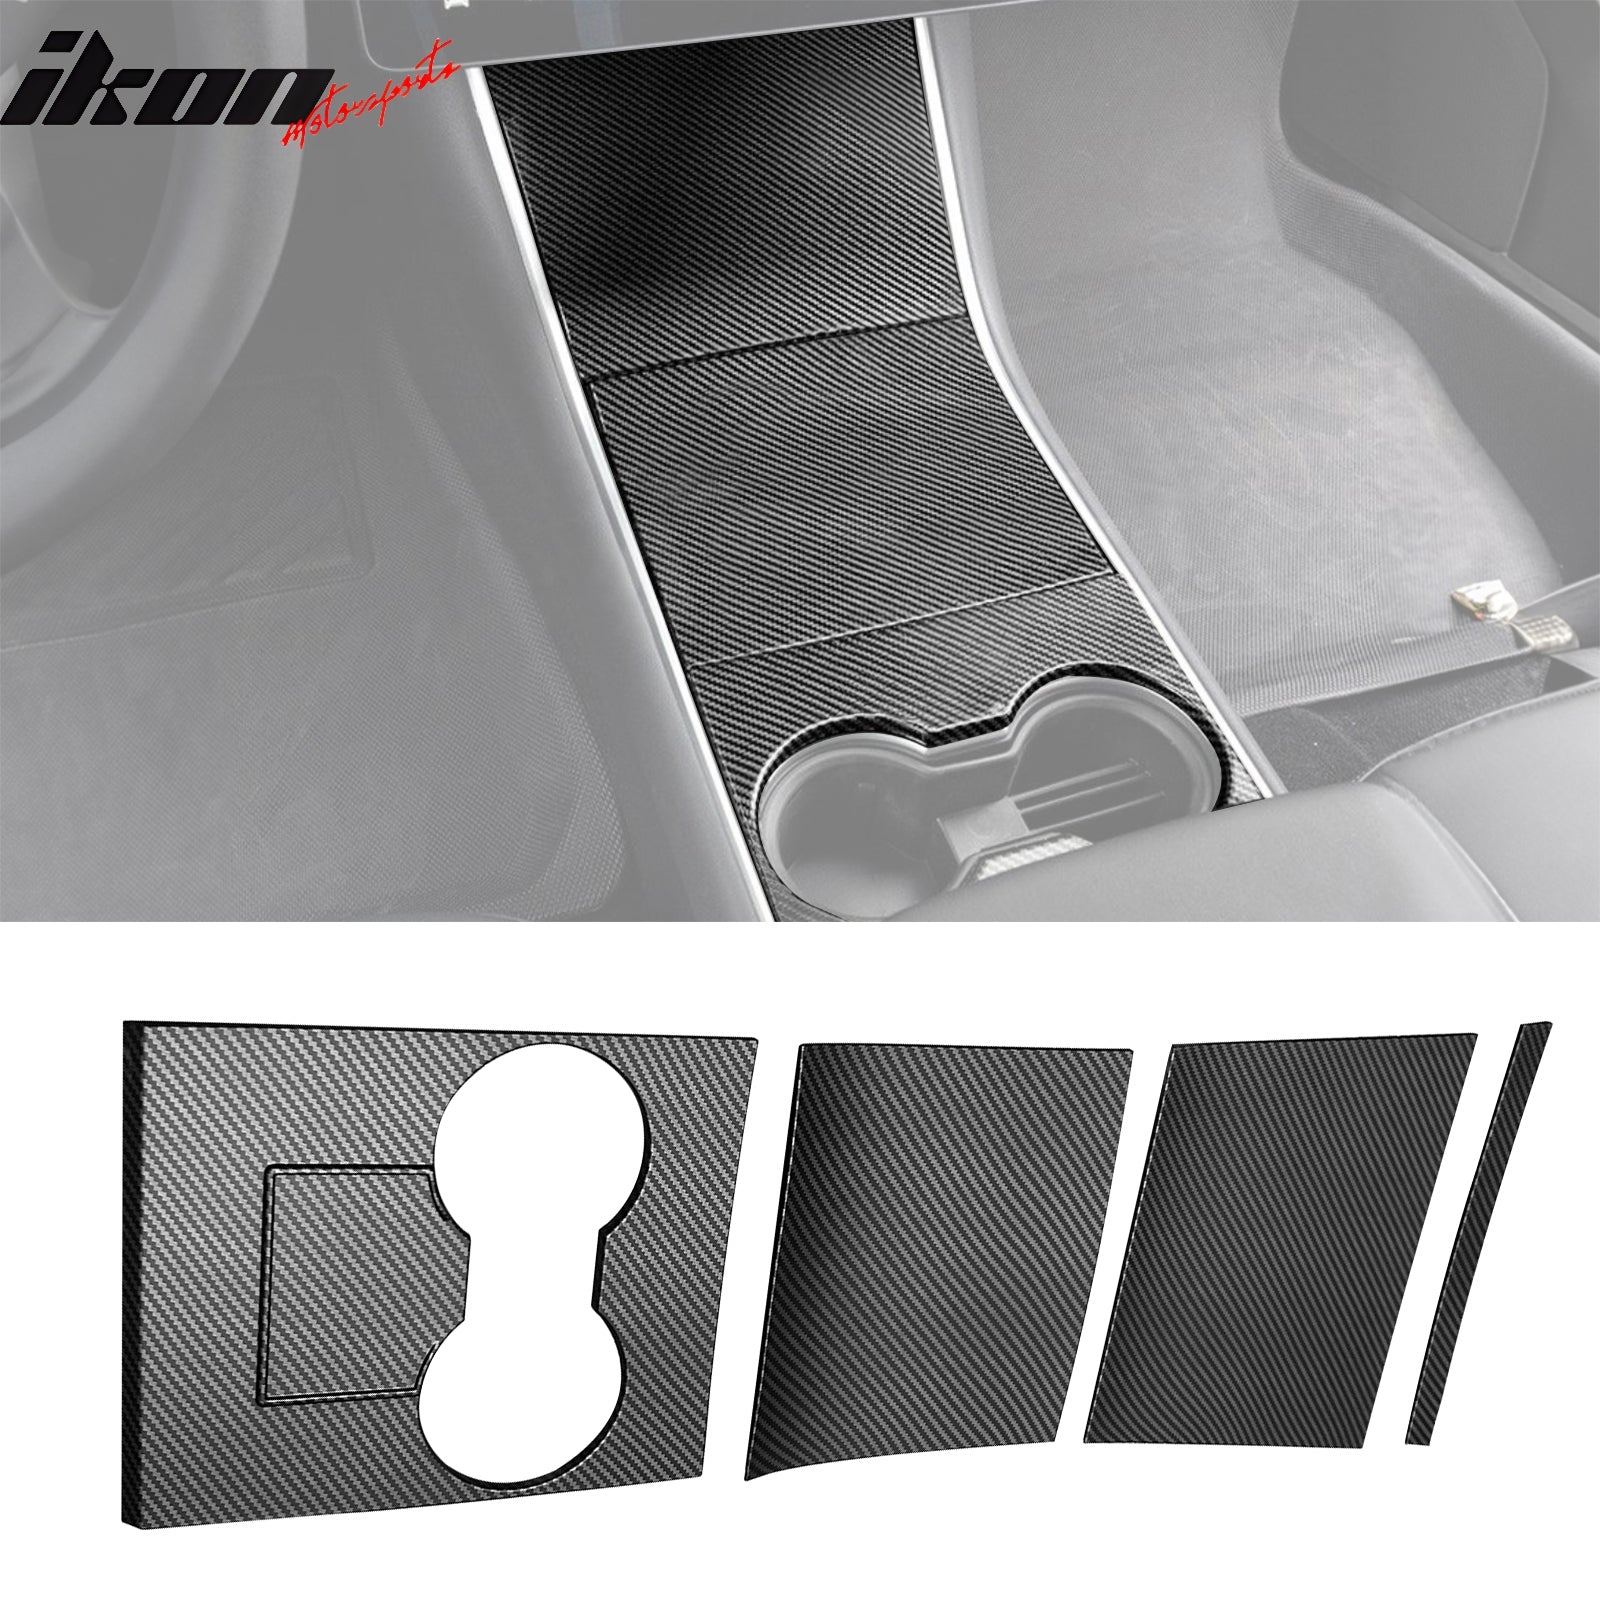 IKON MOTORSPORTS, Console Box Cover Compatible With 2017-2020 Tesla Model 3 All Models, ABS Storage Box Cover Trim 4PCS